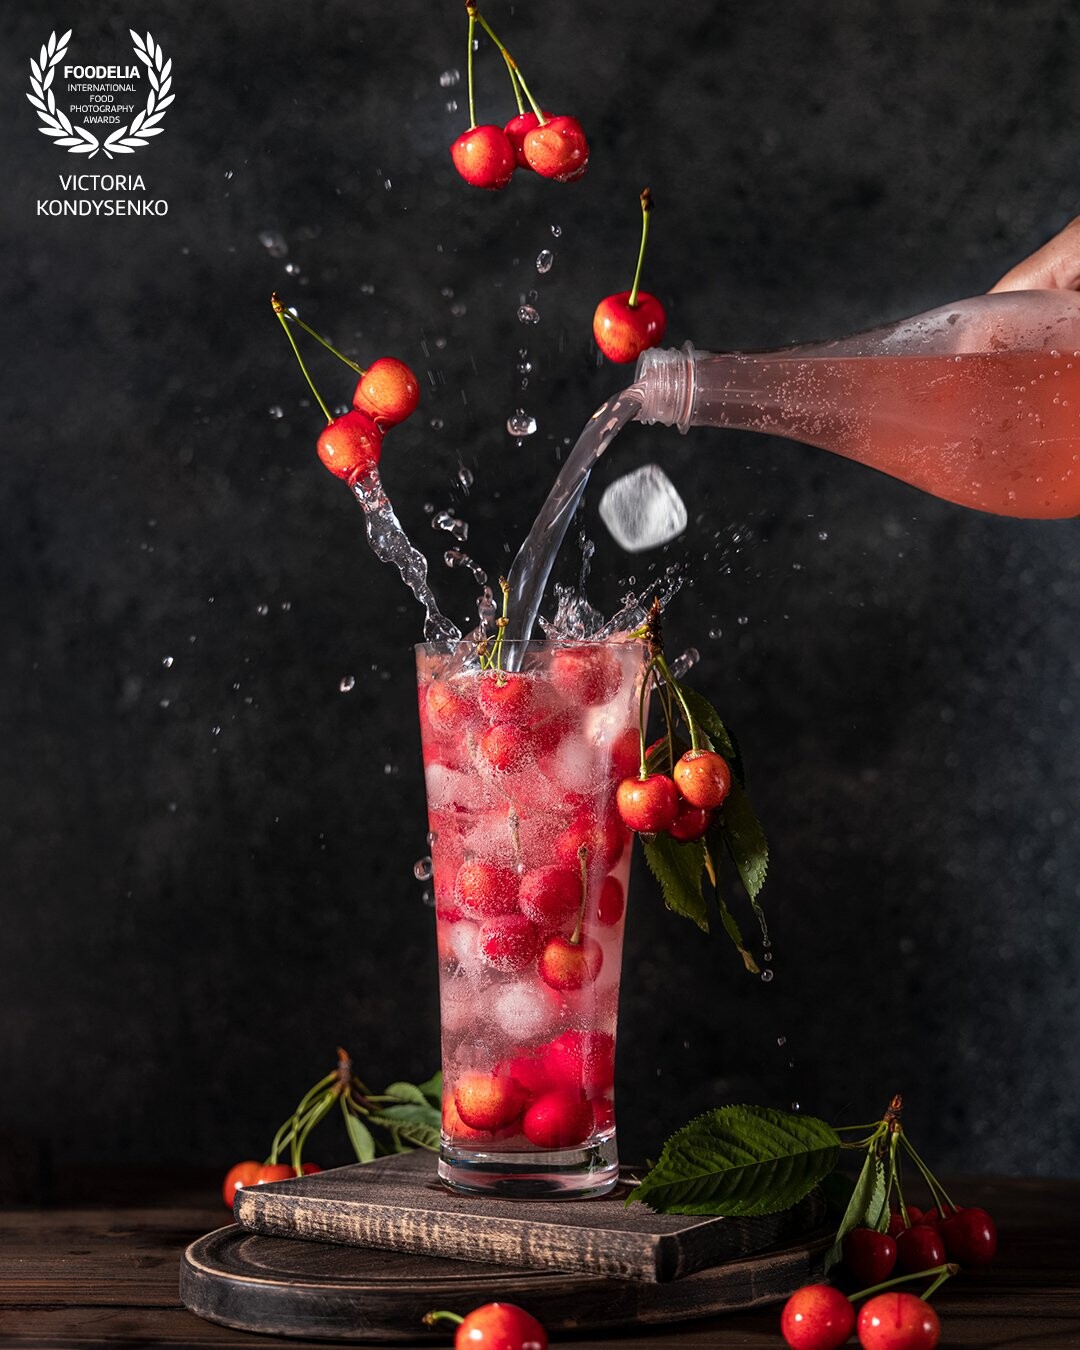 Glass of many cherry or merry berries with lemonade water splash, fly berries and ice, pouring lemonade from bottle to glass surround of fresh cherry or merry berries. Dark rustic wooden surface